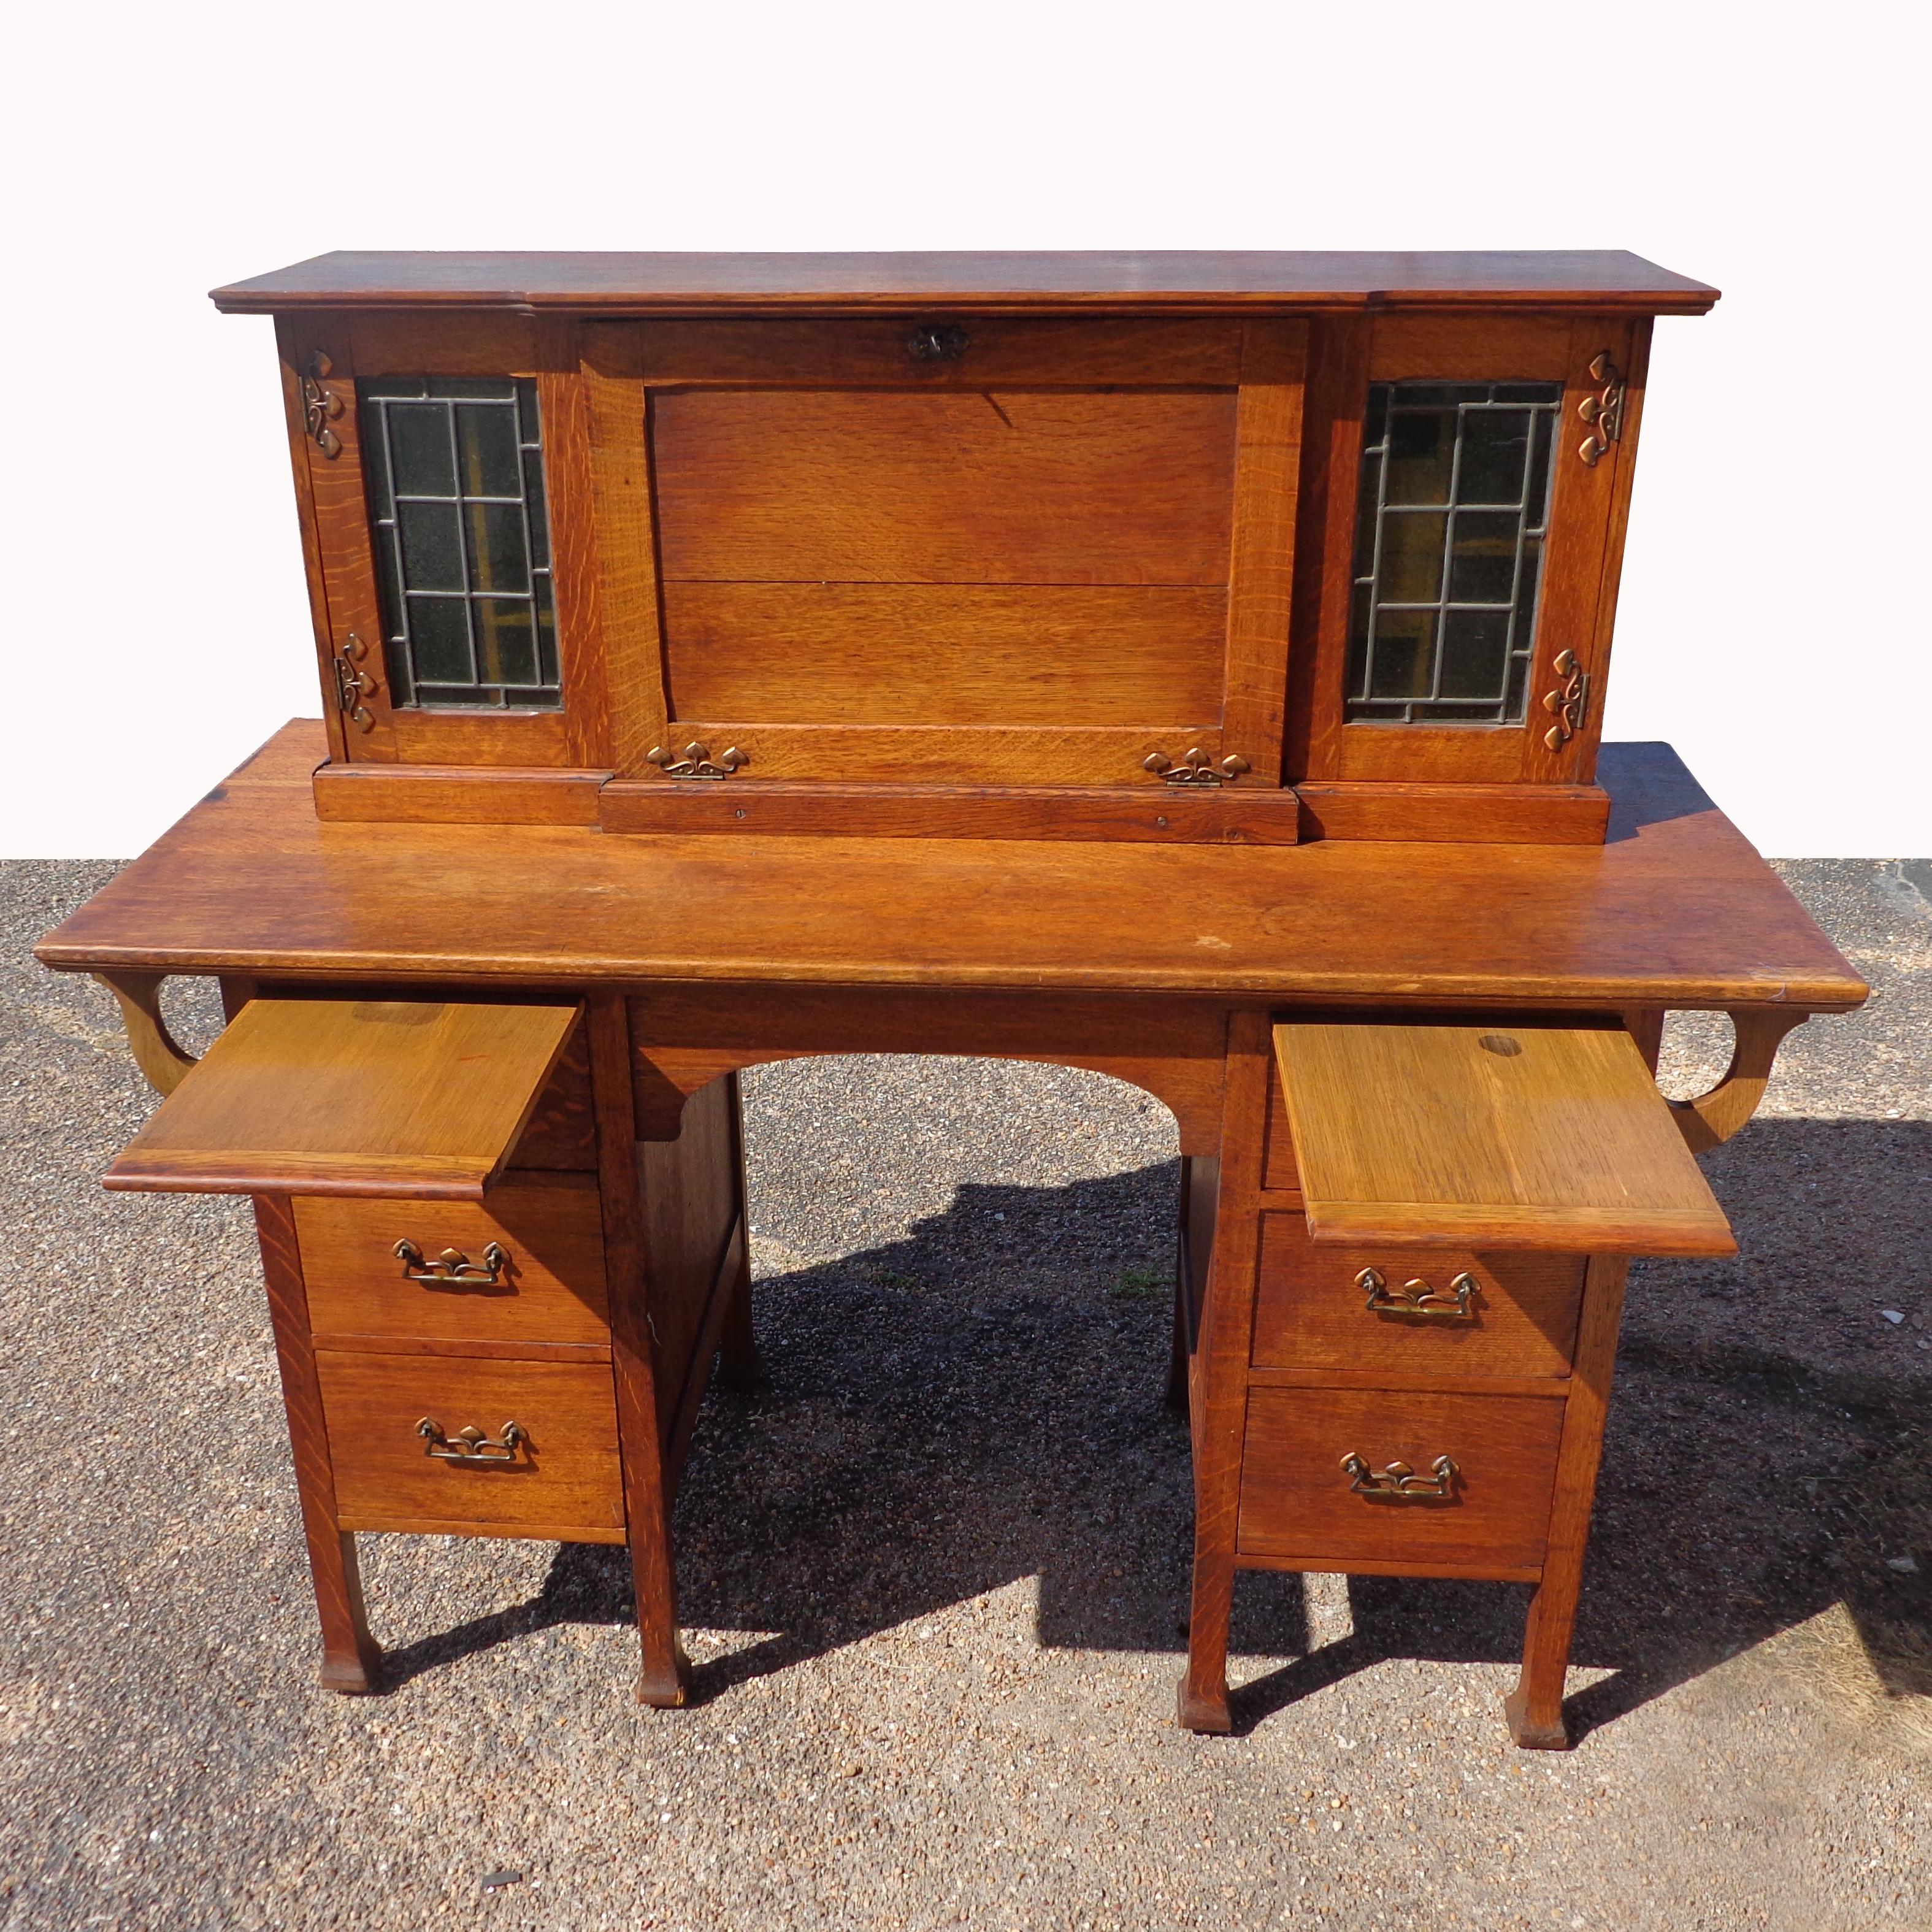 Antique English Arts & Crafts desk

 
Quarter sawn oak construction with Art Nouveau appliques and leaded glass doors frame the top organizer that folds down to a leather tooled work service. Six drawers and pull out tablets. Brass pulls and key